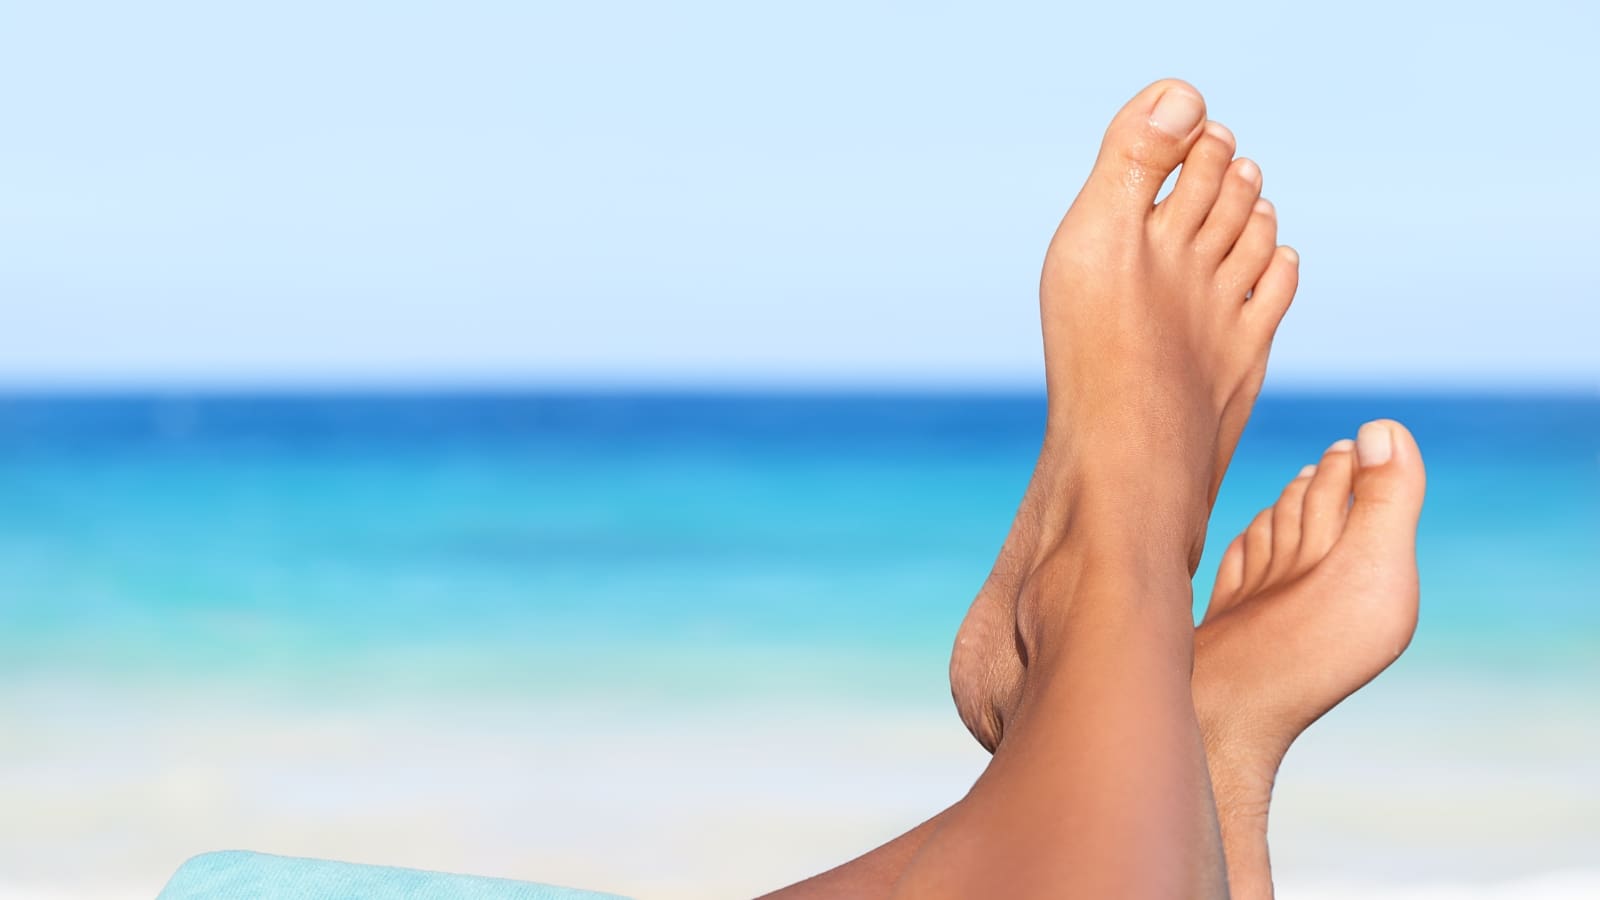 Apply sunscreen to protect your feet